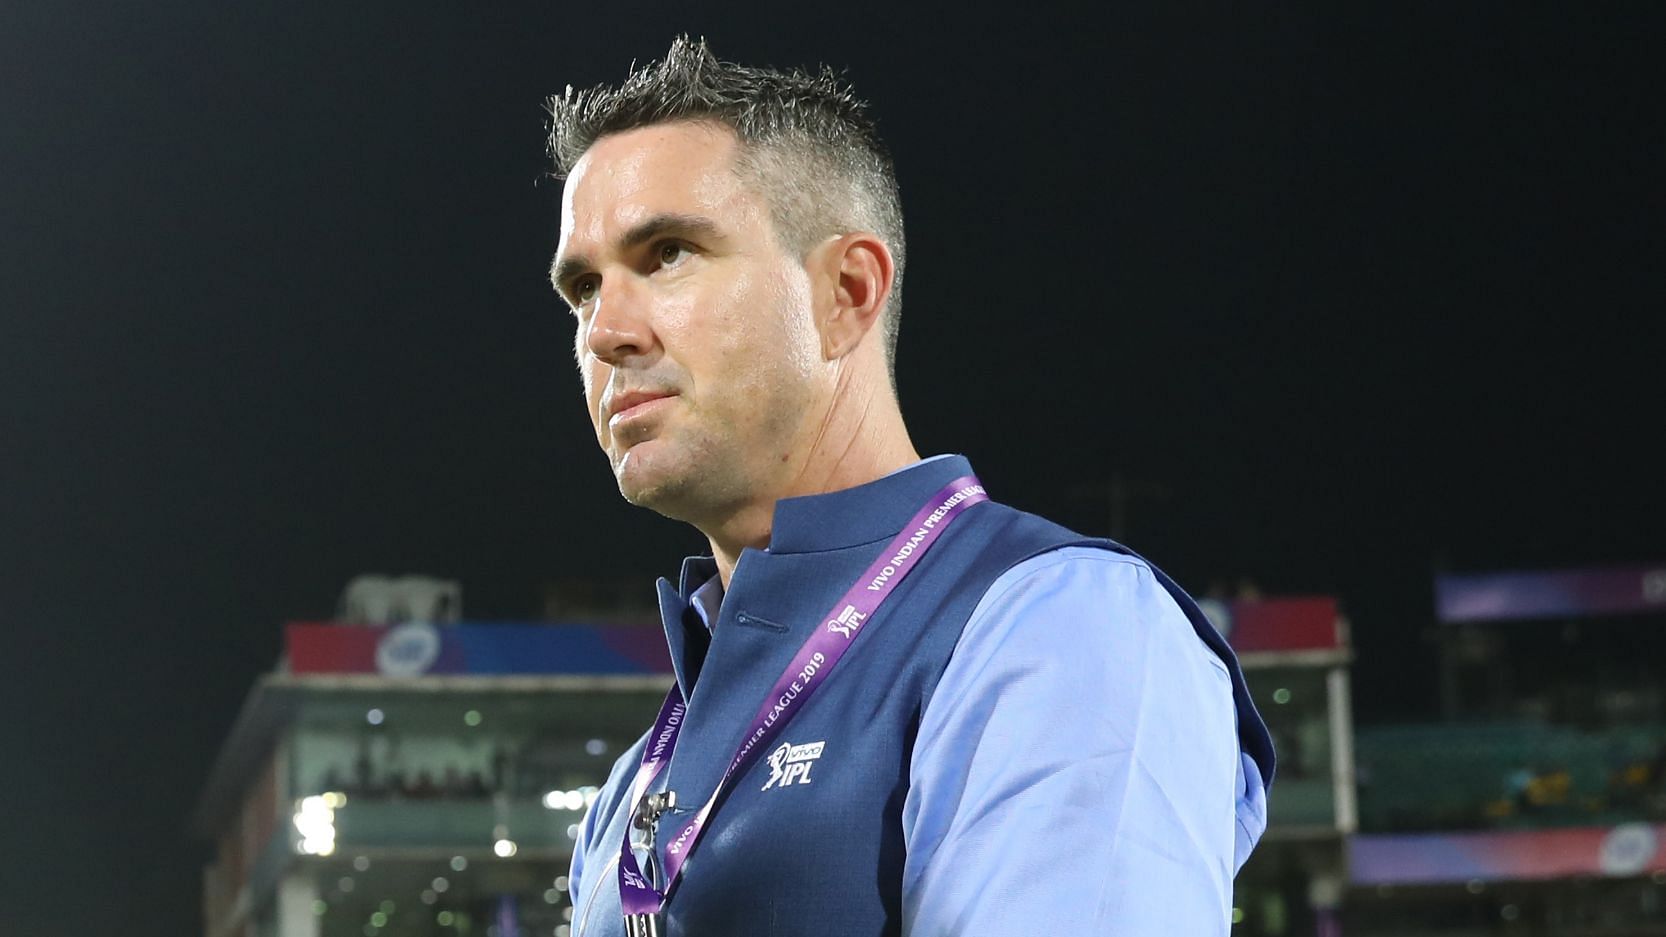 Kevin Pietersen has shared his opinion on the ‘Mankading’ incident.&nbsp;